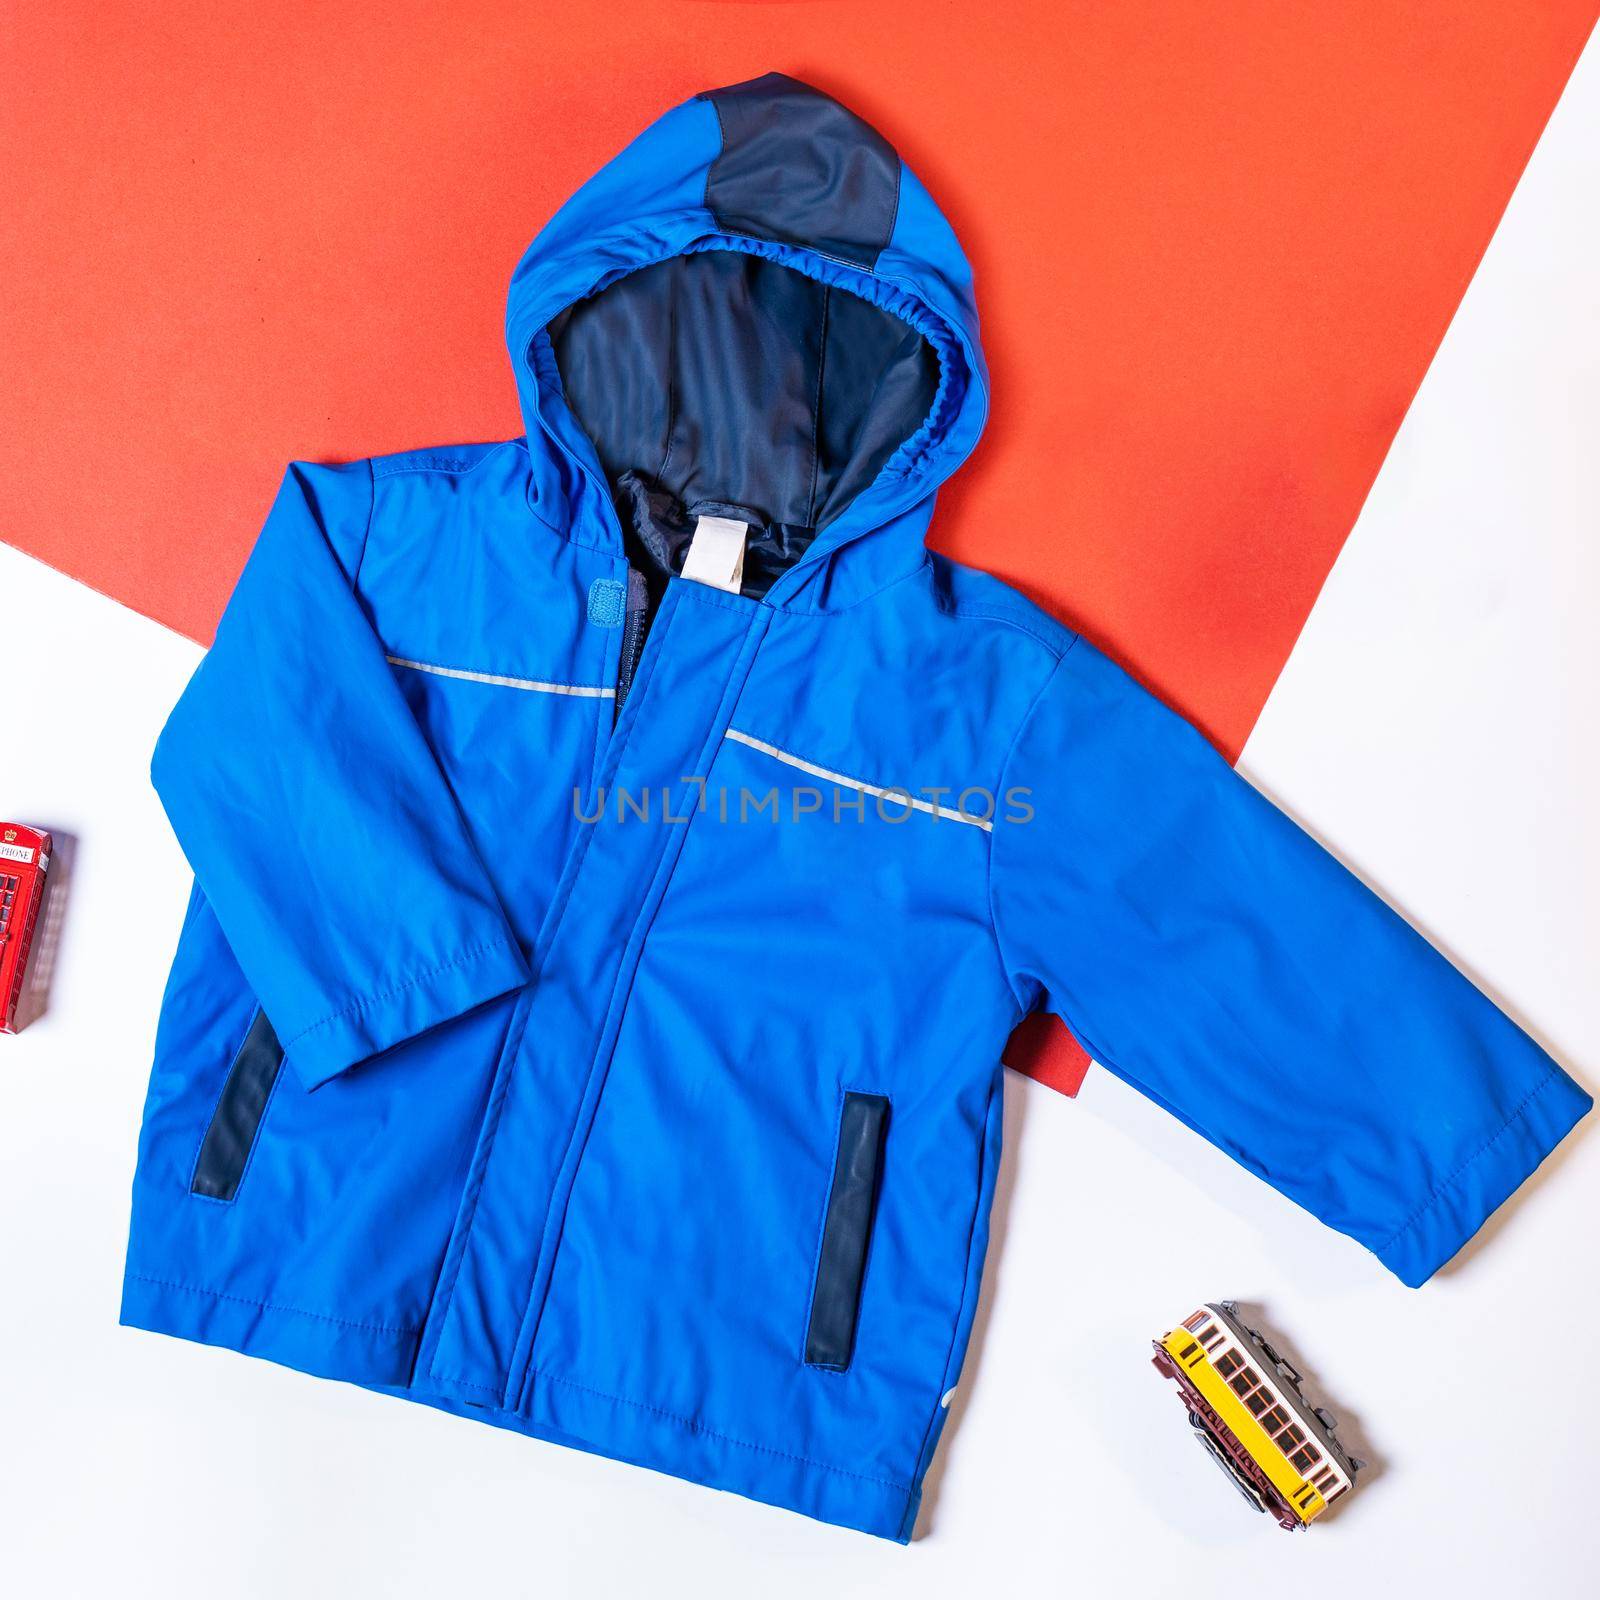 Blue hood jacket mock up isolated top view